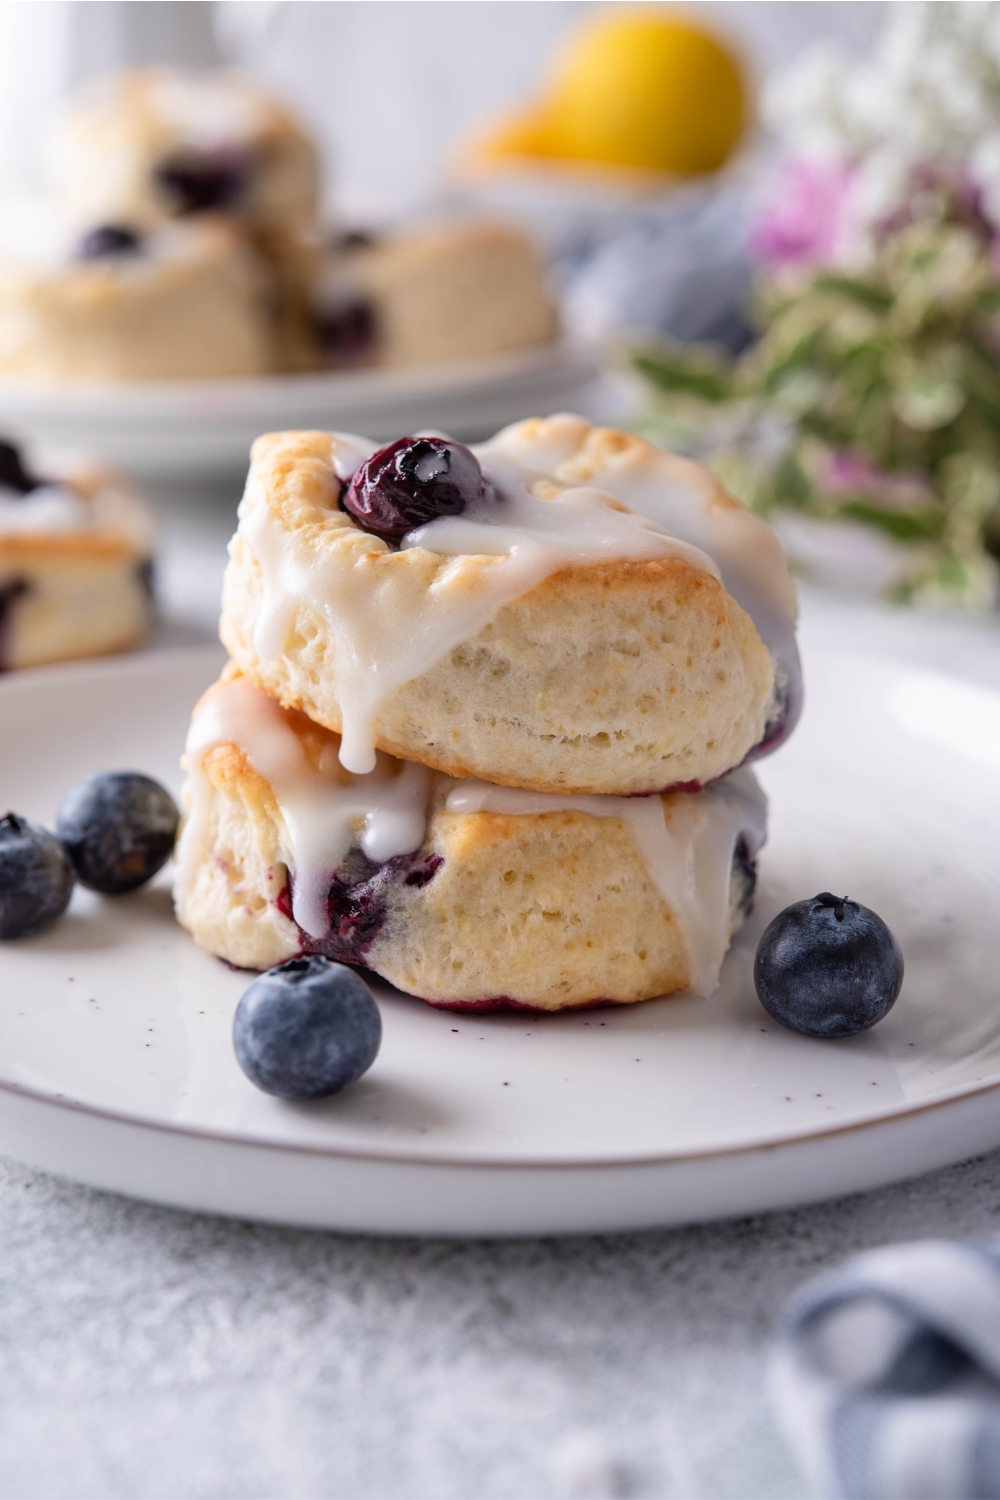 A stack of two blueberry biscuits topped with icing on a plate.